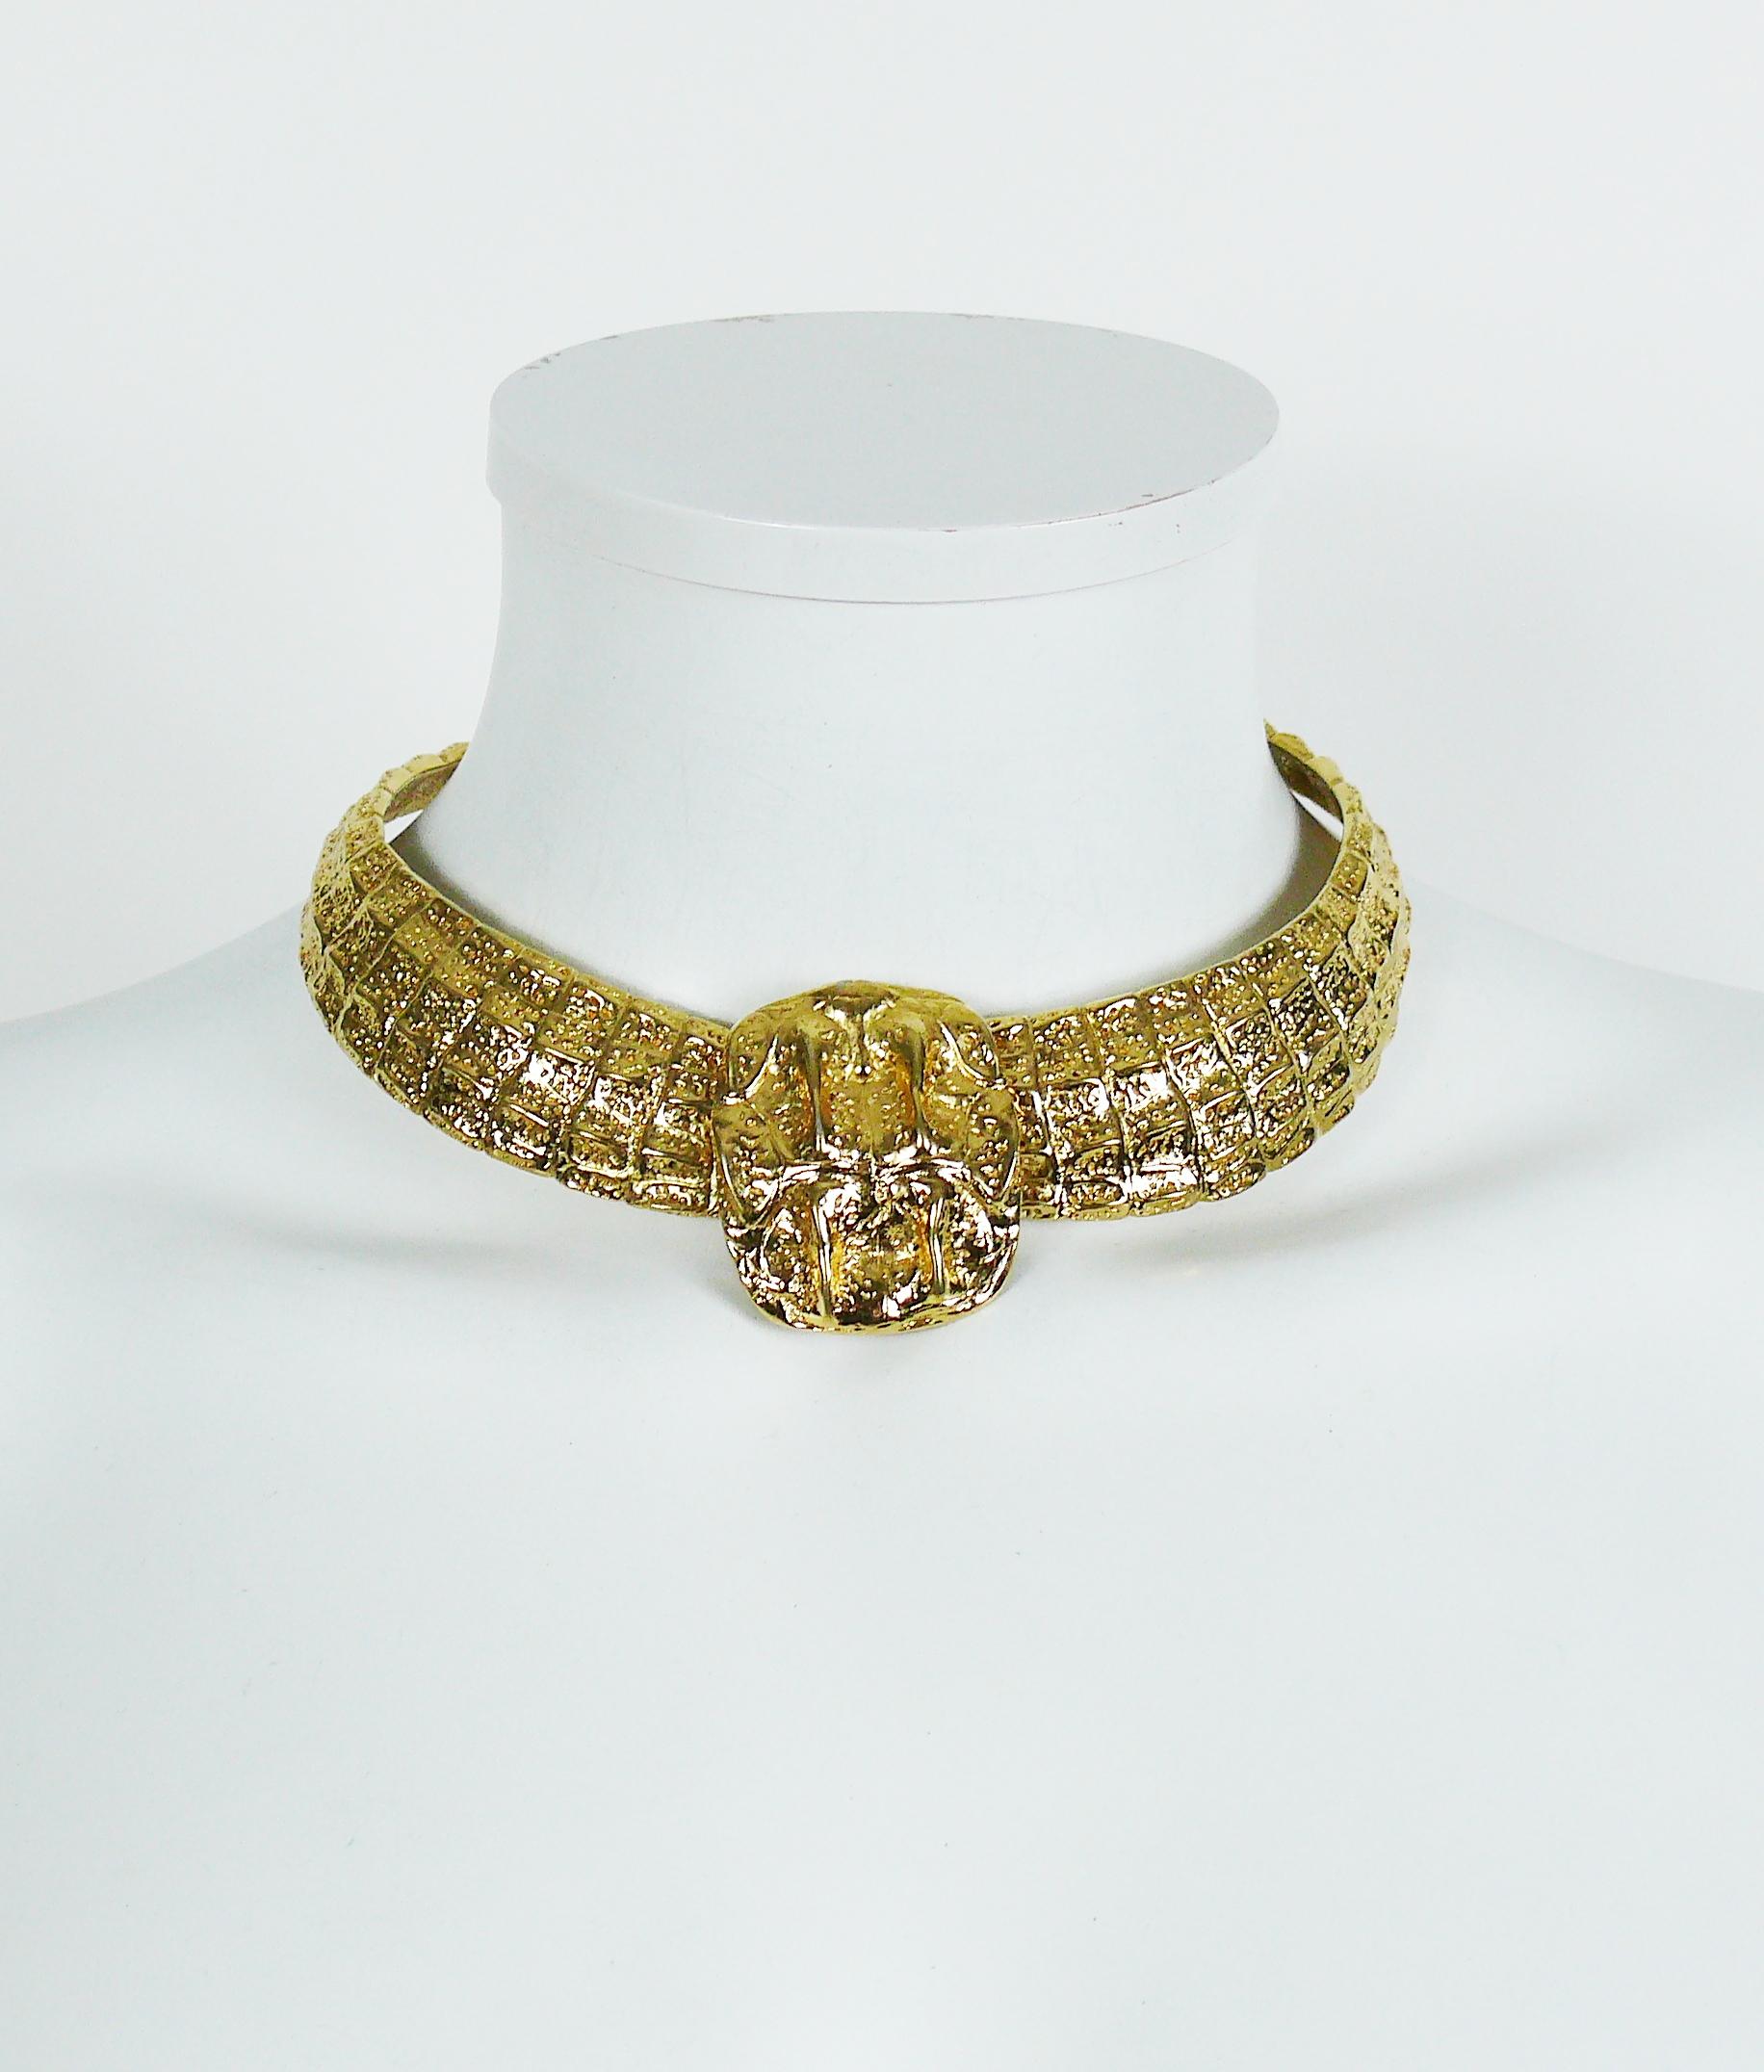 YVES SAINT LAURENT vintage gold toned choker necklace featuring a crocodile scale design.

Hook closure with extension chain.

Embossed YSL Made in France.

Indicative measurements : max. circumference approx. 42.40 cm (16.69 inches) / width approx.